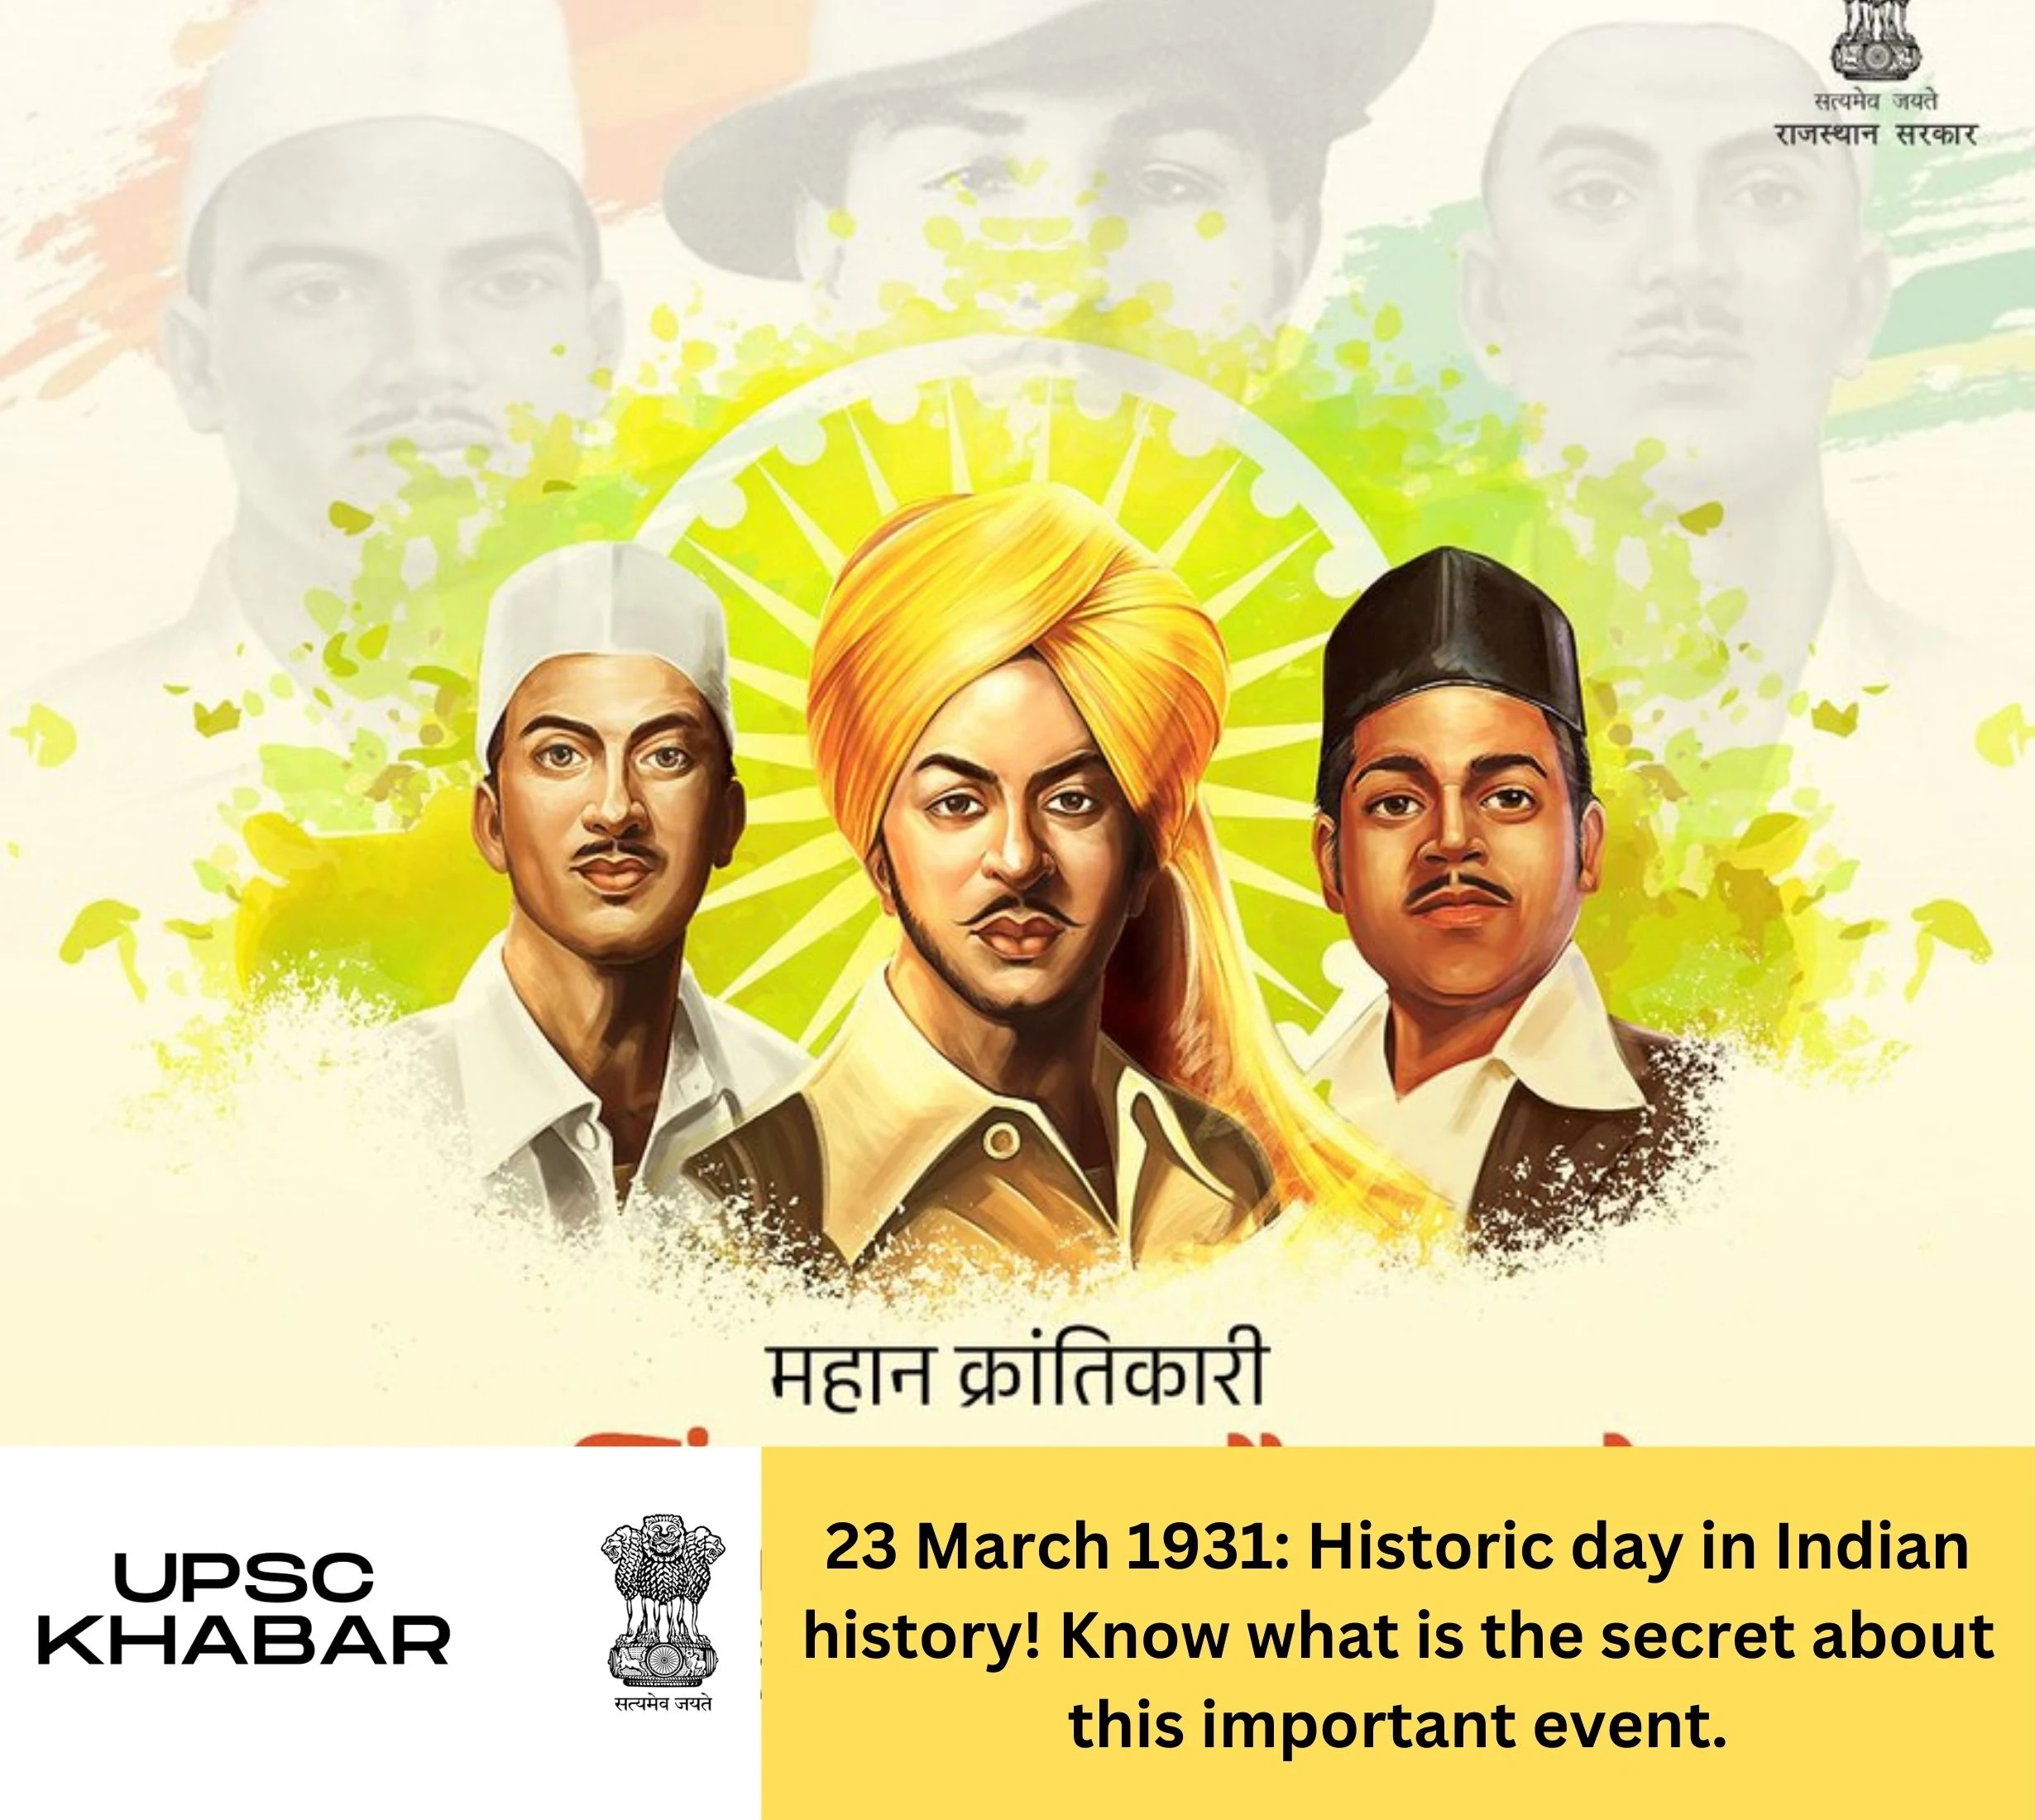 23 March 1931: Historic day in Indian history! Know what is the secret about this important event.